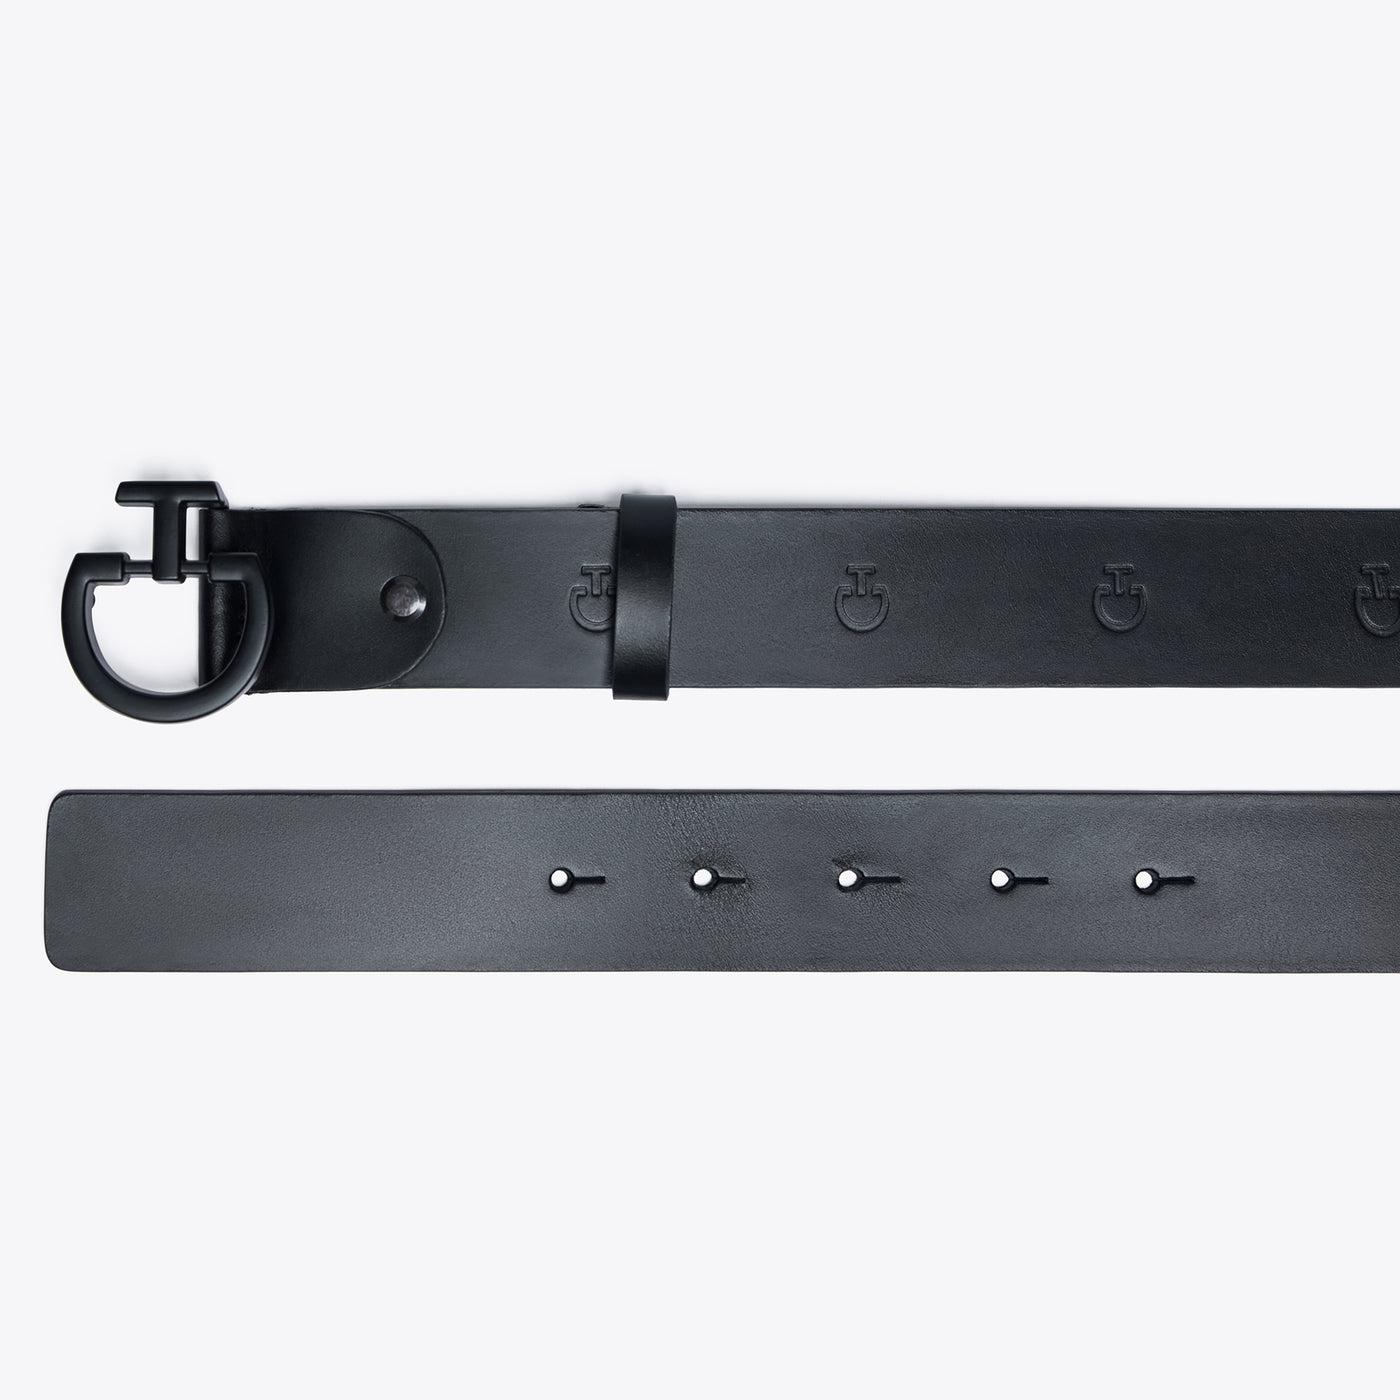 CT women's leather belt with black CT buckle